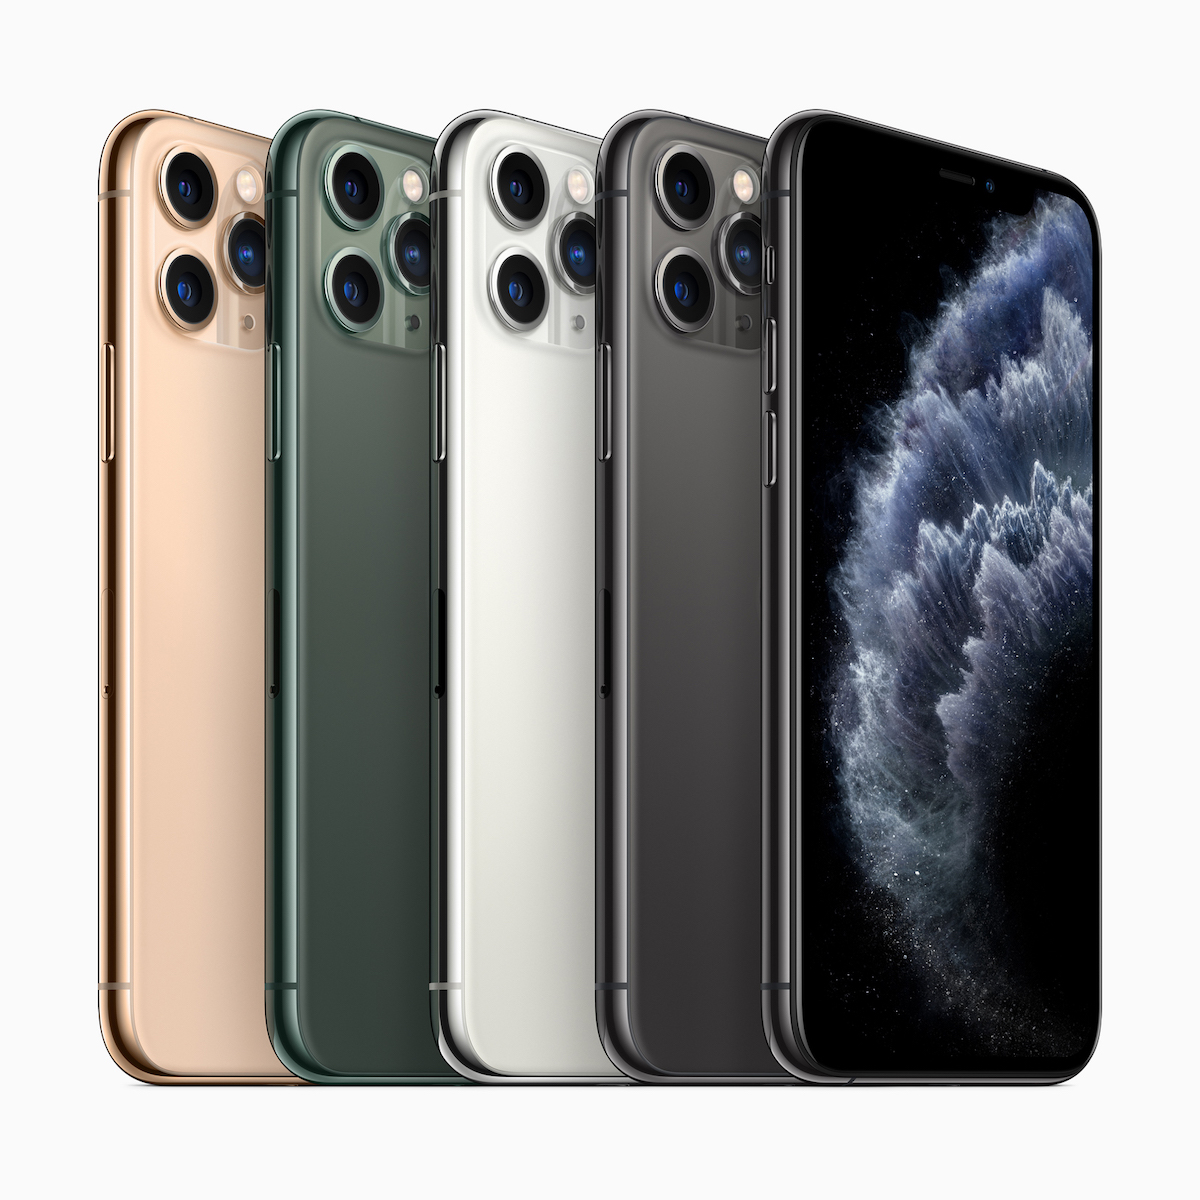 iPhone 11シリーズはバッテリー容量が増加 ‐「11 Pro Max」は約25%増加